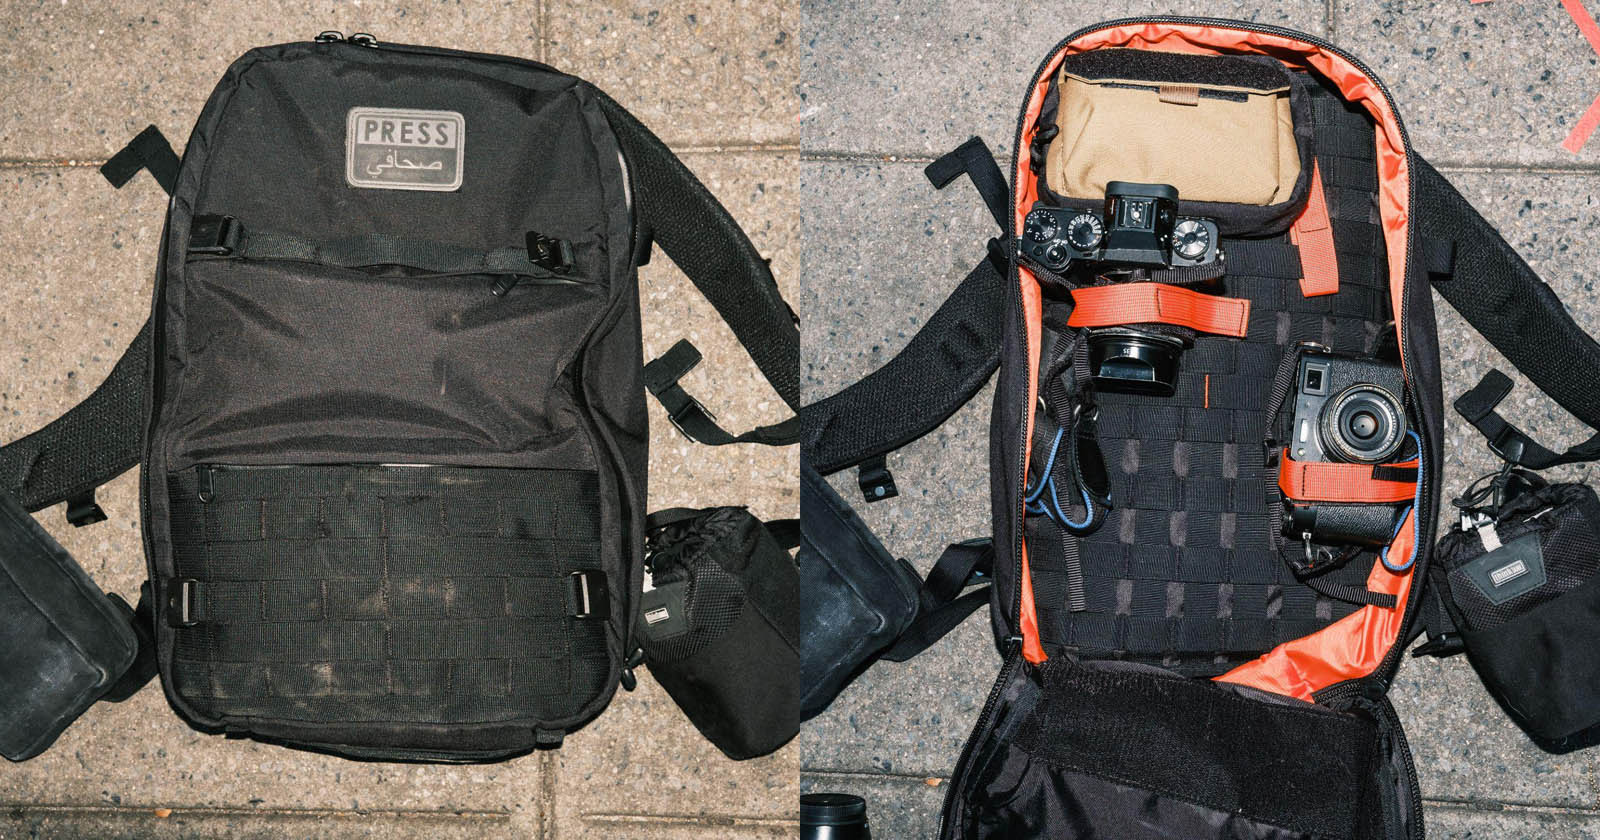  cutline backpack review near-perfect modular bag photographers 